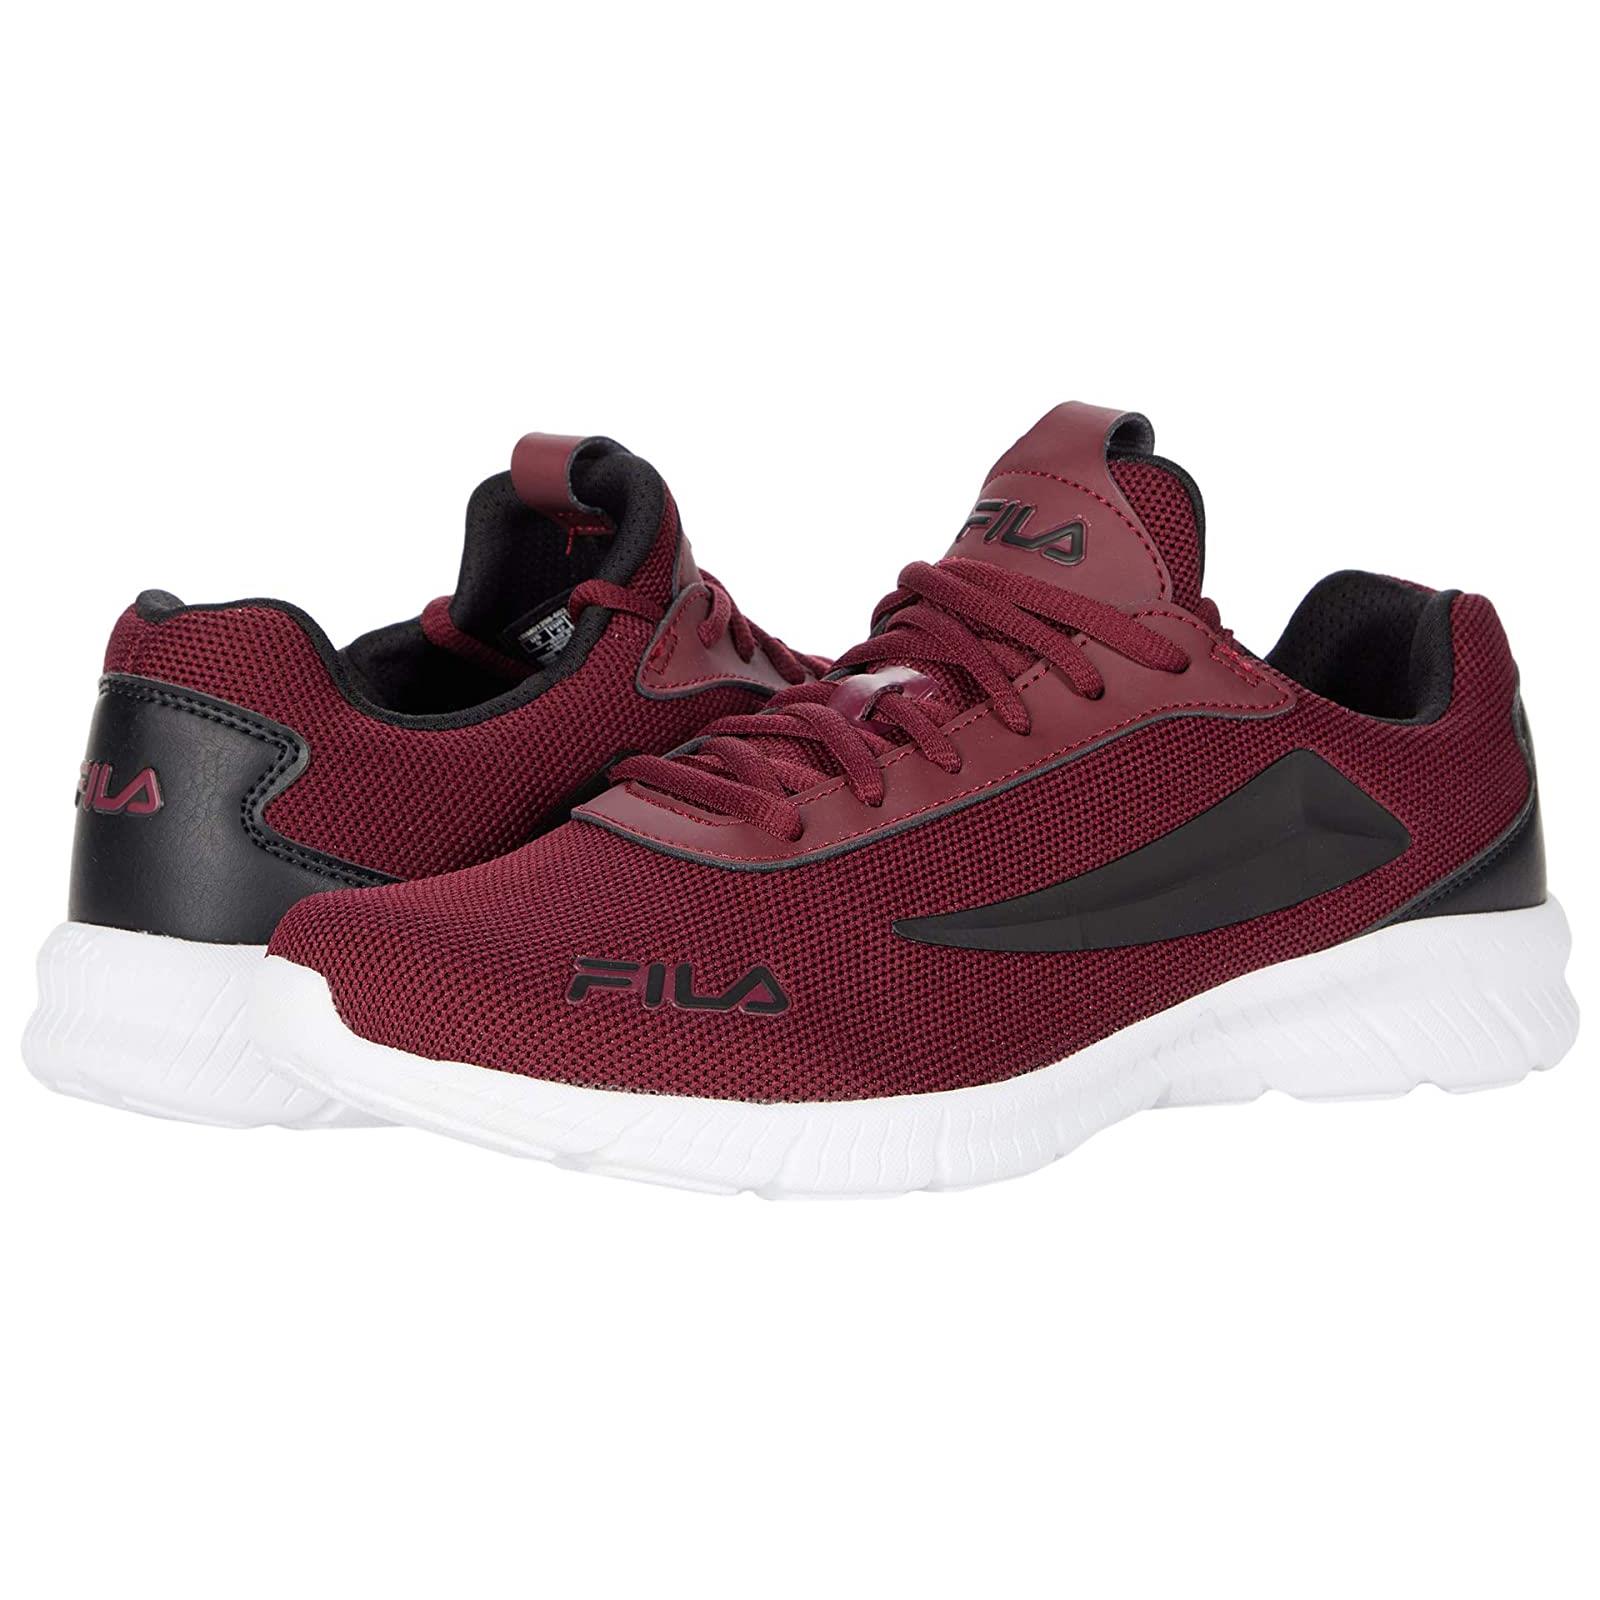 Man`s Sneakers Athletic Shoes Fila Oxidation Tawny/Black/White